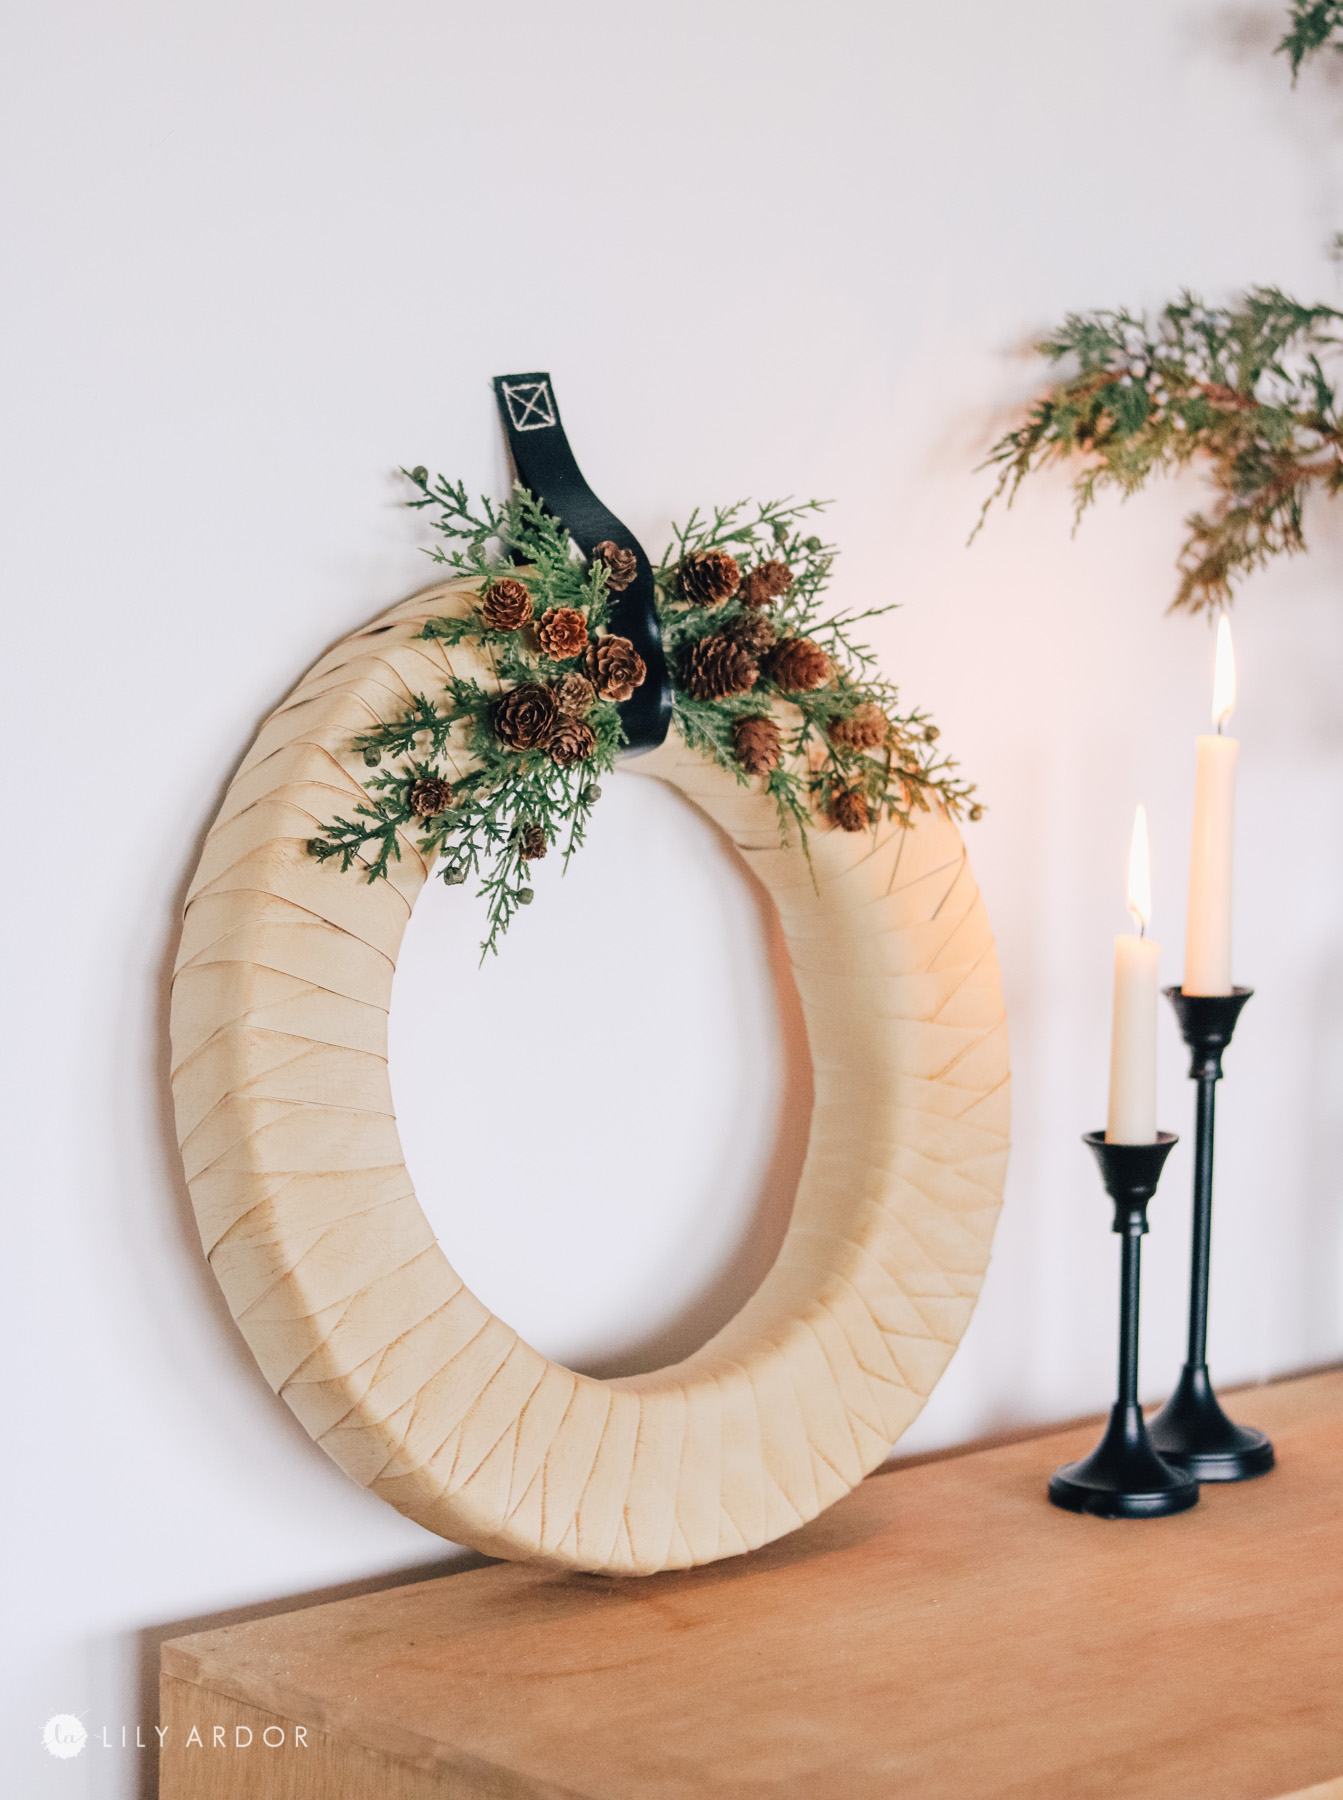 How to make a wreath tutorial